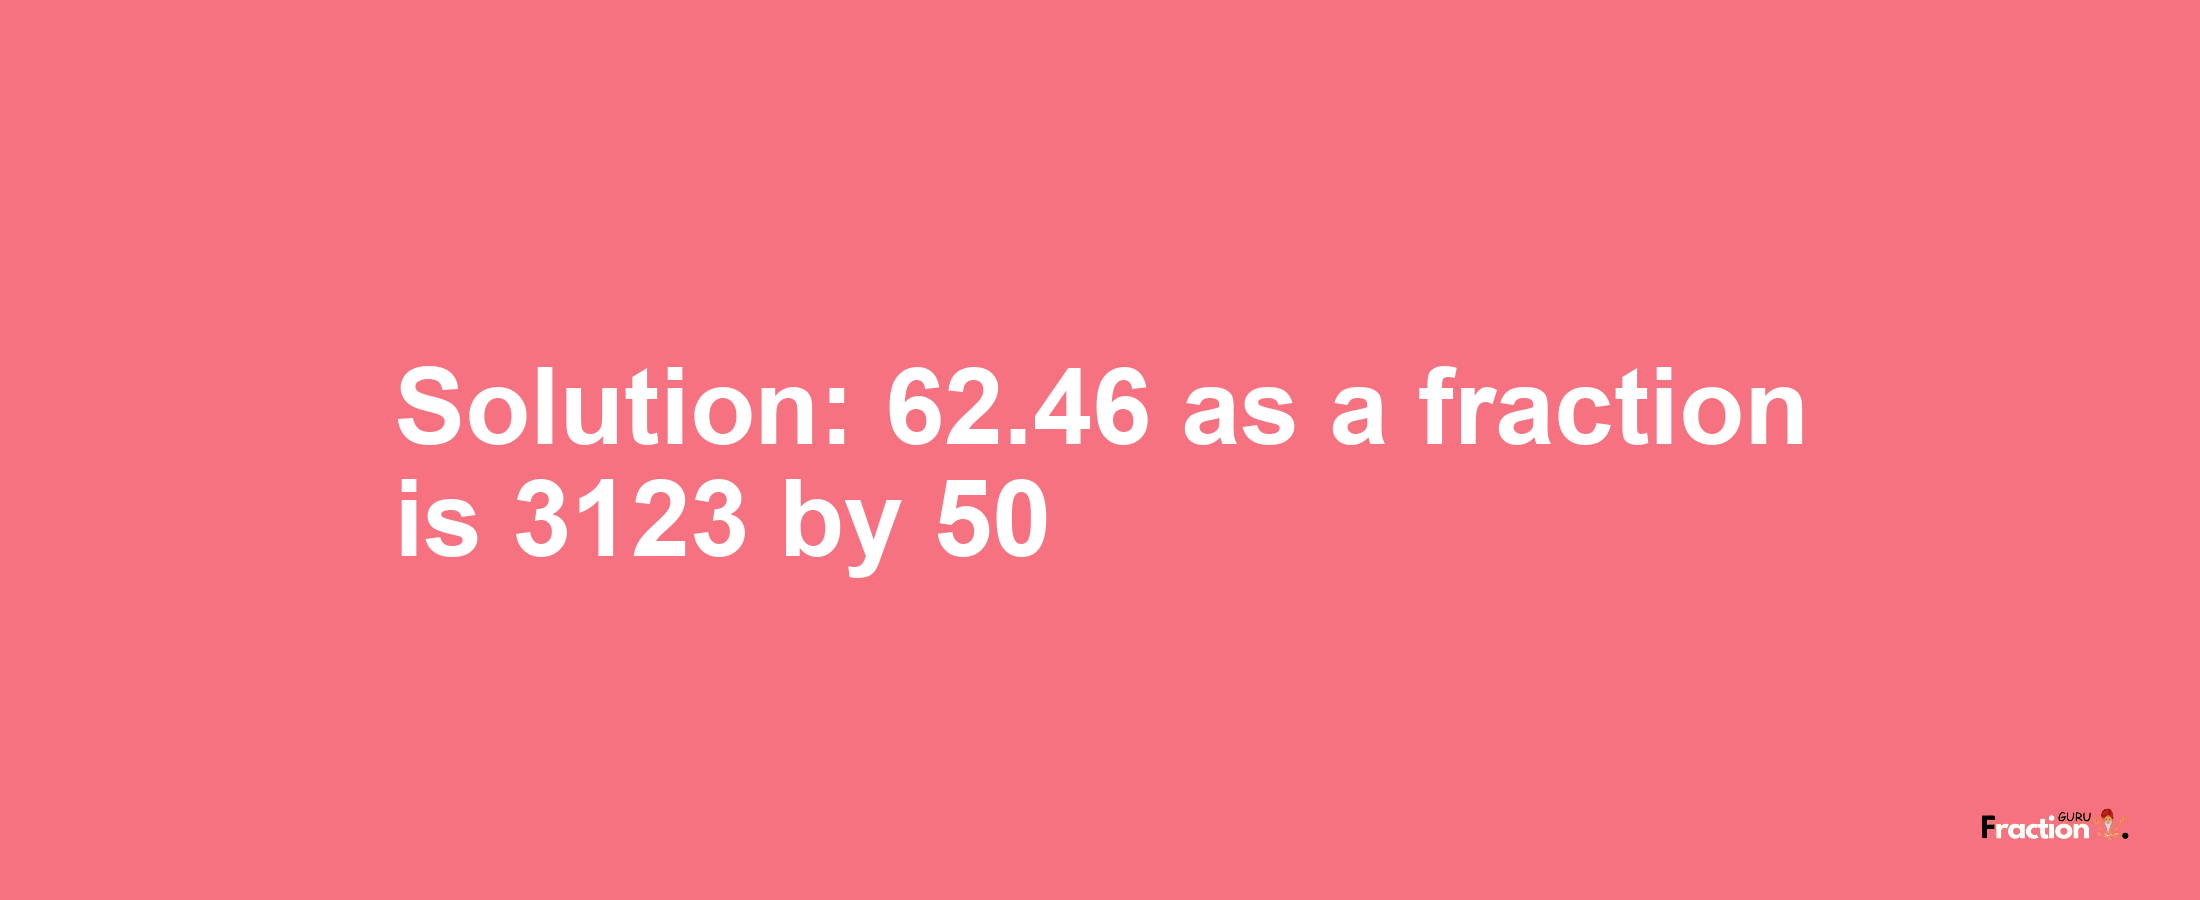 Solution:62.46 as a fraction is 3123/50